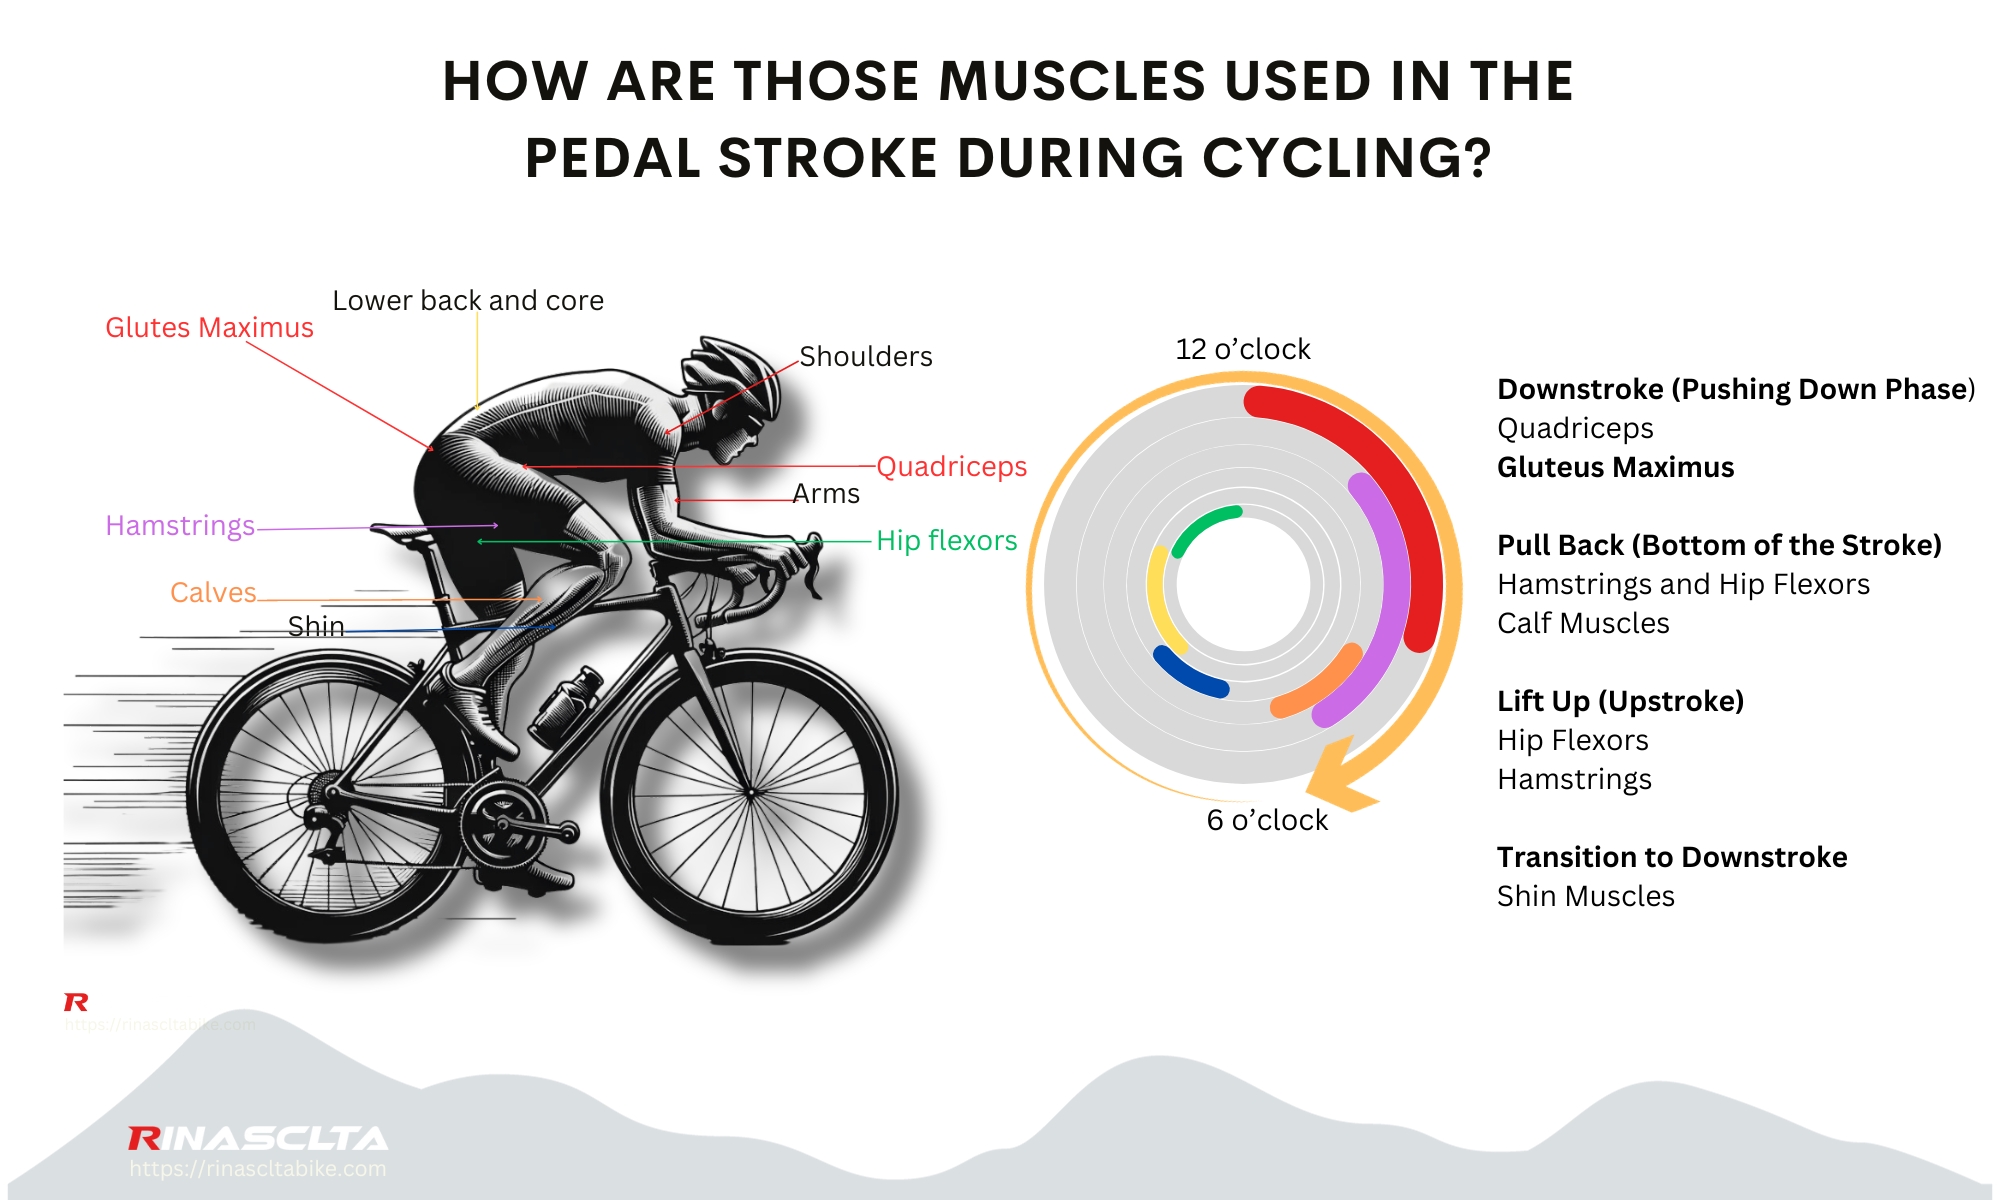 Muscle used in cycling diagram